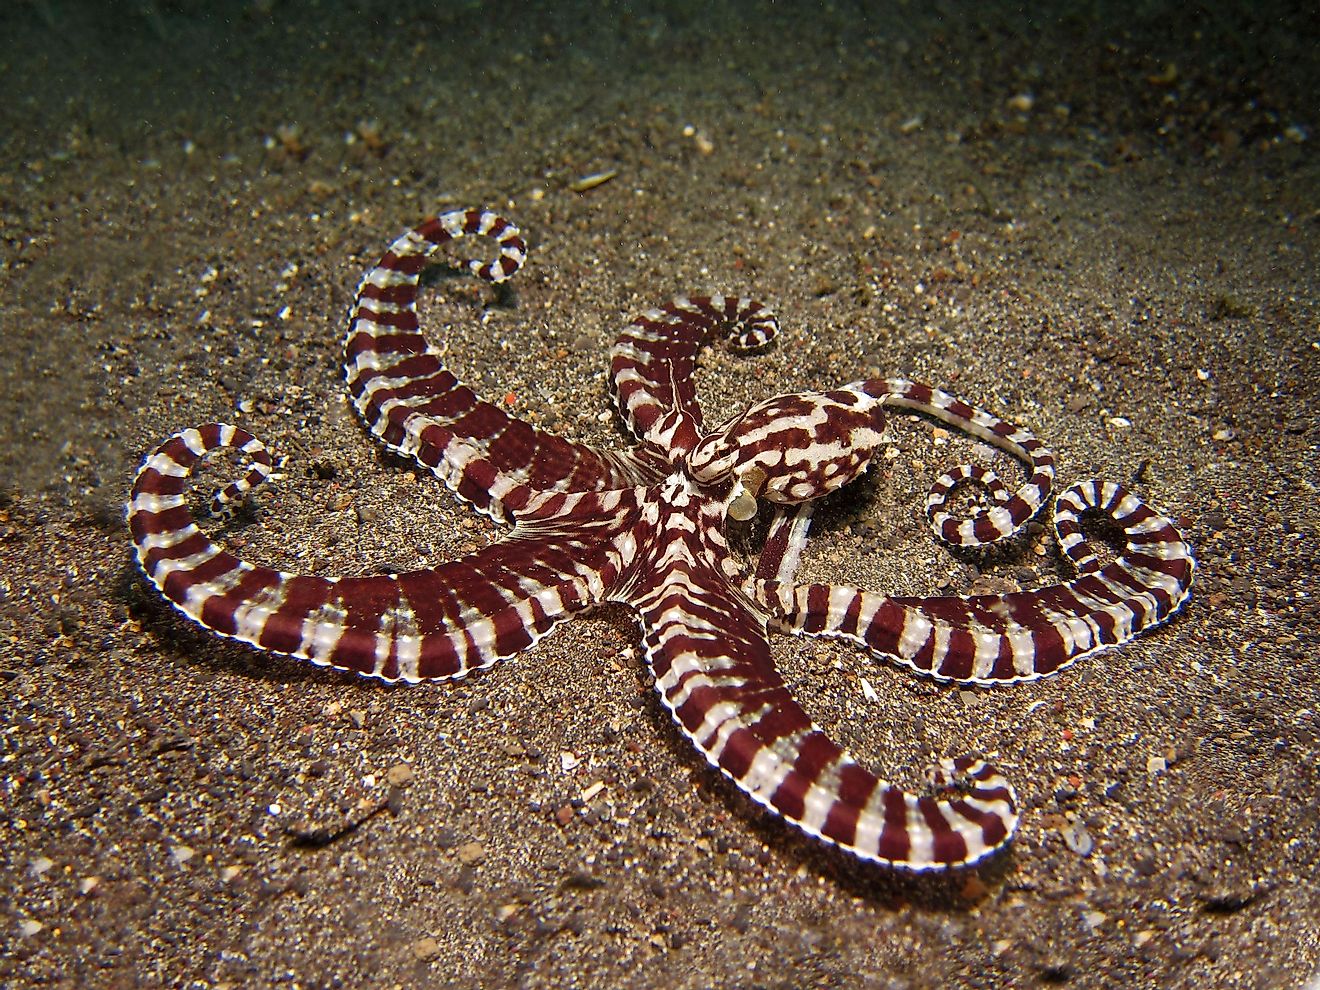 This octopus species discovered in Indonesia not only can change its color, but it can also change its behavior and movement patterns!